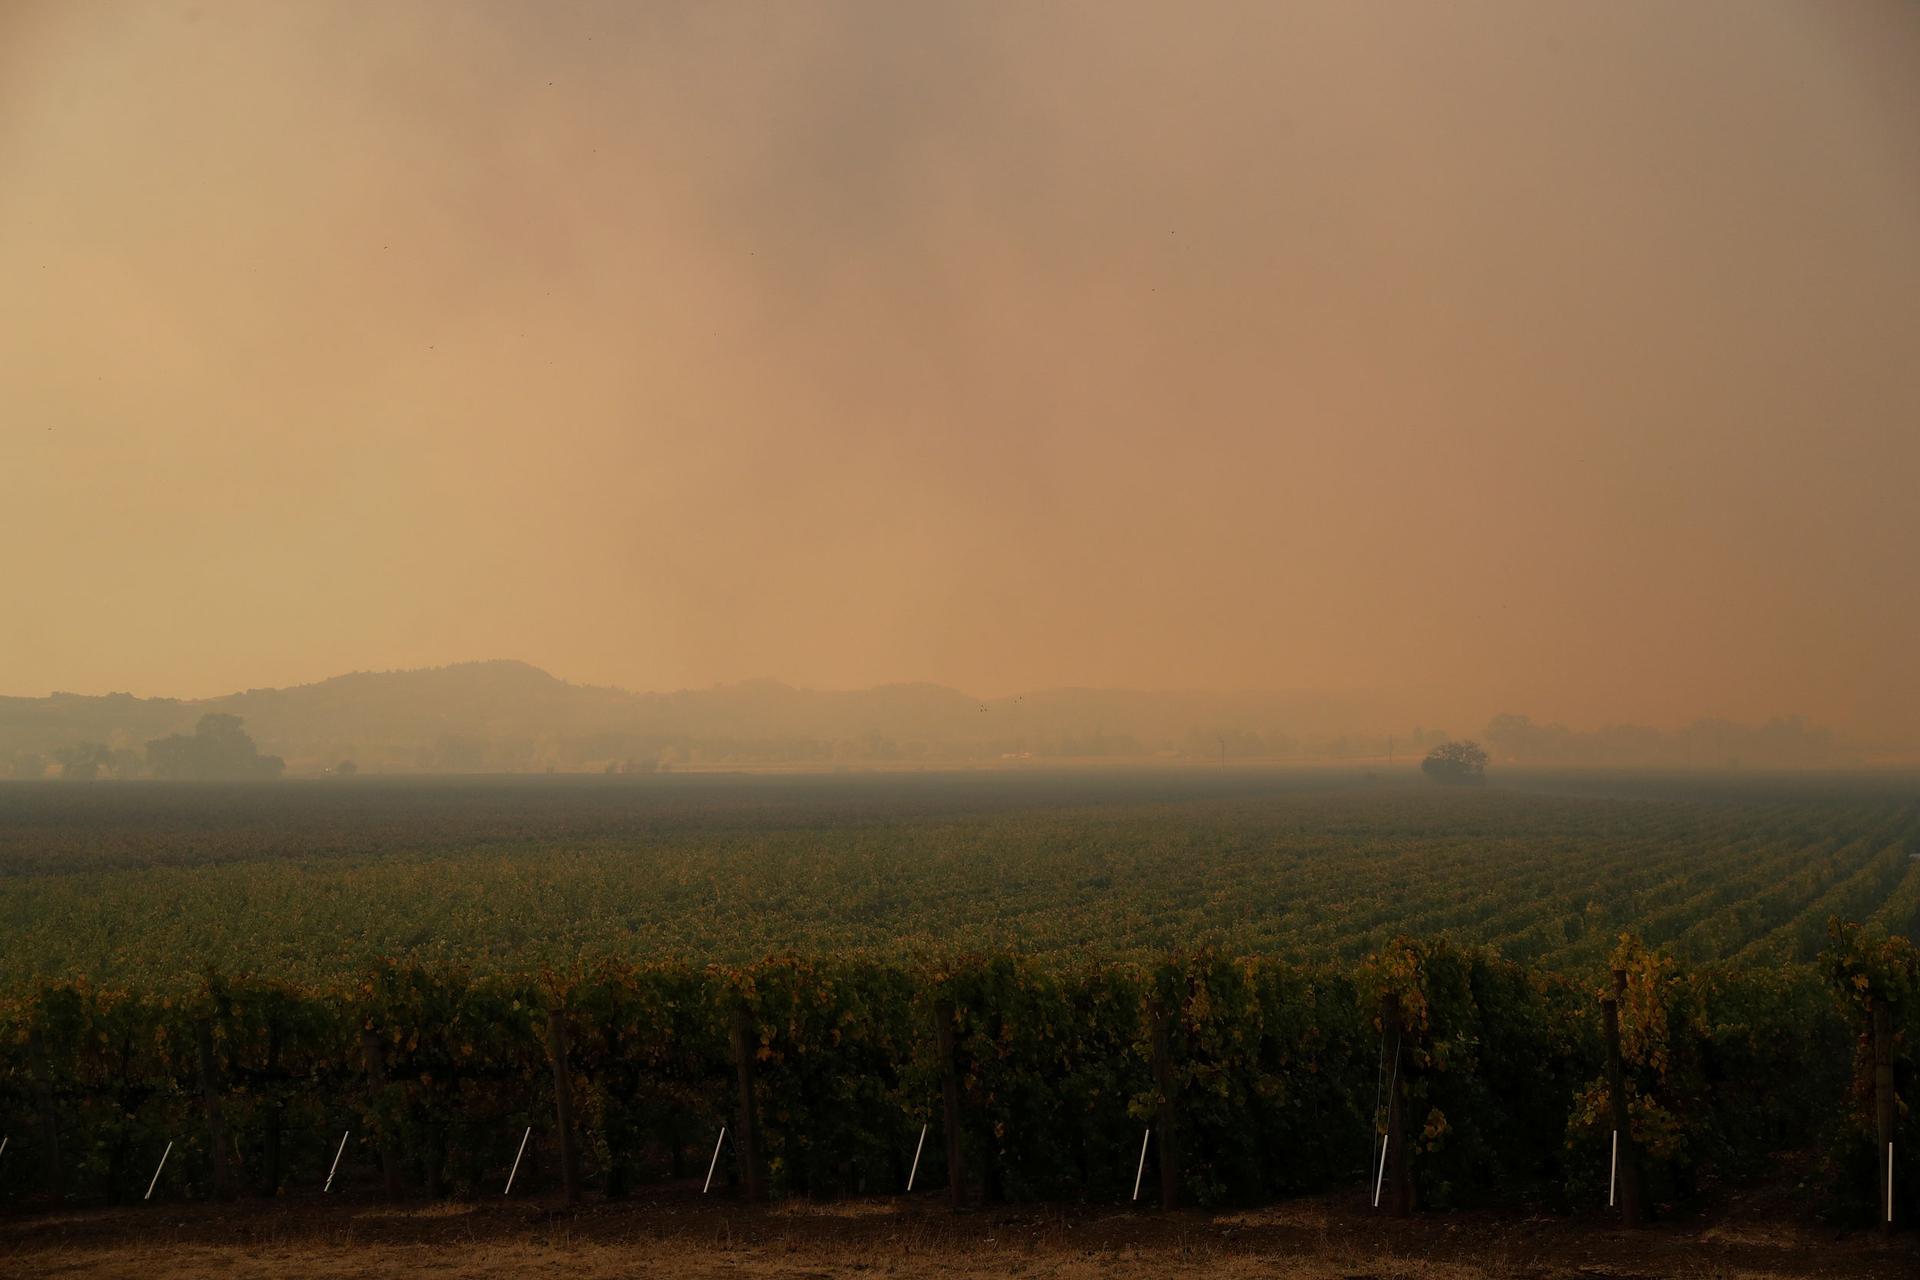 A vineyard is shown with mountains off in the distance with smoke clouding the entire sky.